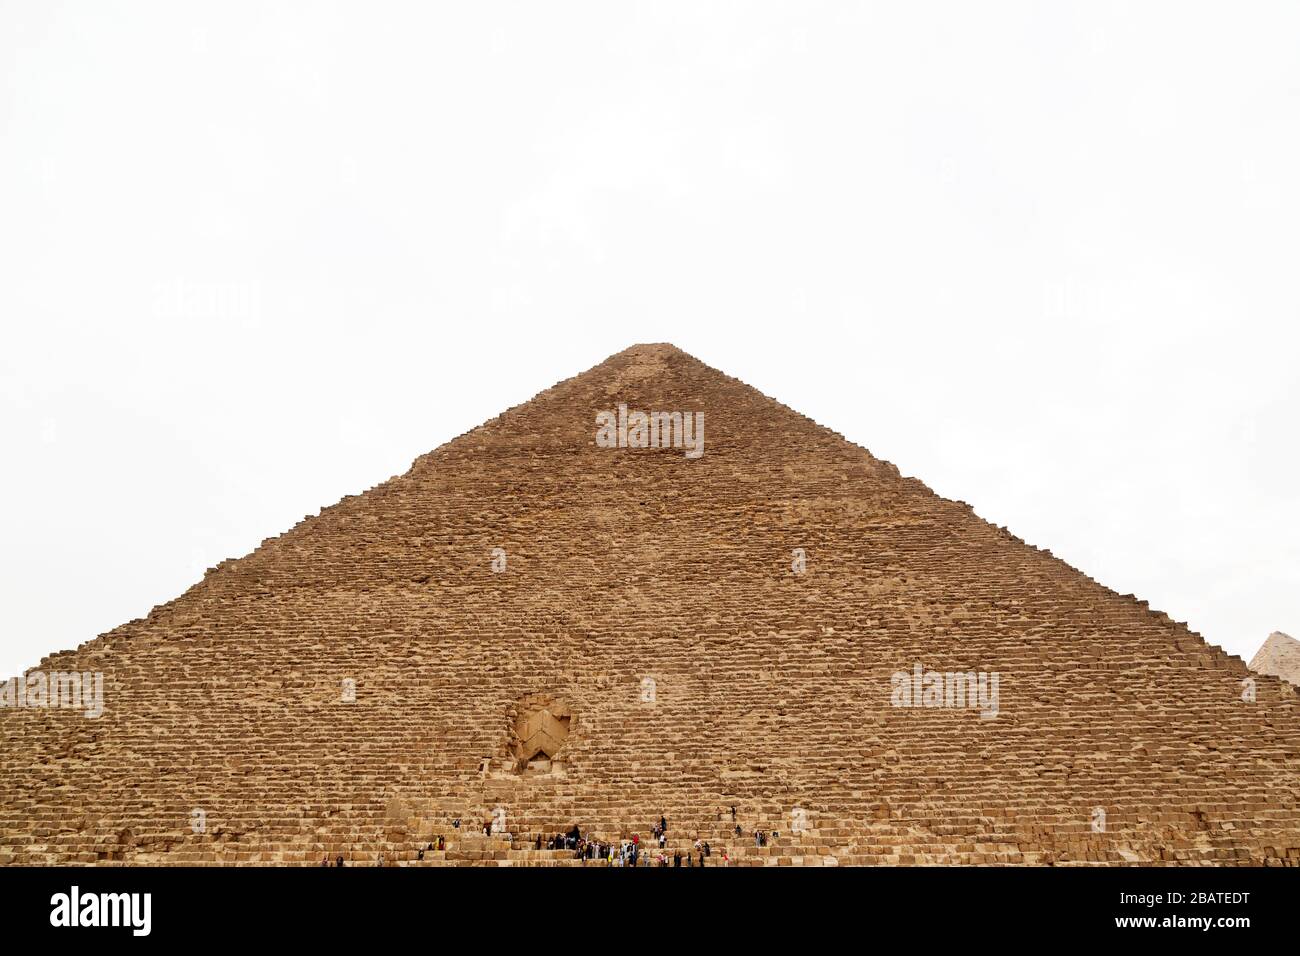 Entrance to the Pyramid of Khufu, the Great Pyramid of Giza, on the Giza Plateau in Cairo, Egypt. The ancient monument is part of a UNESCO World Herit Stock Photo